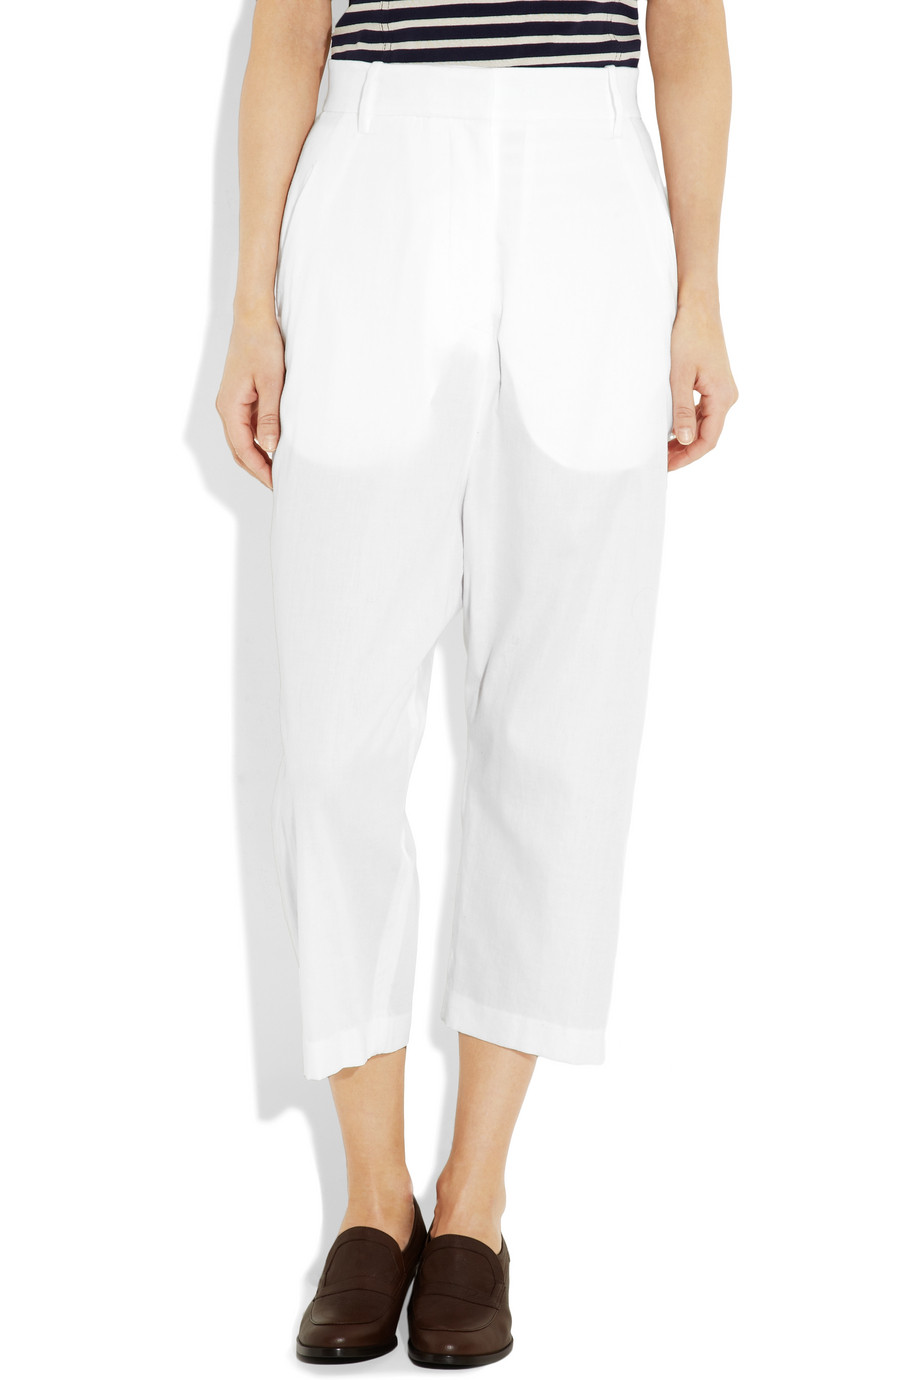 Lyst - The Row Seedun Cropped Cotton Wide-leg Pants in White